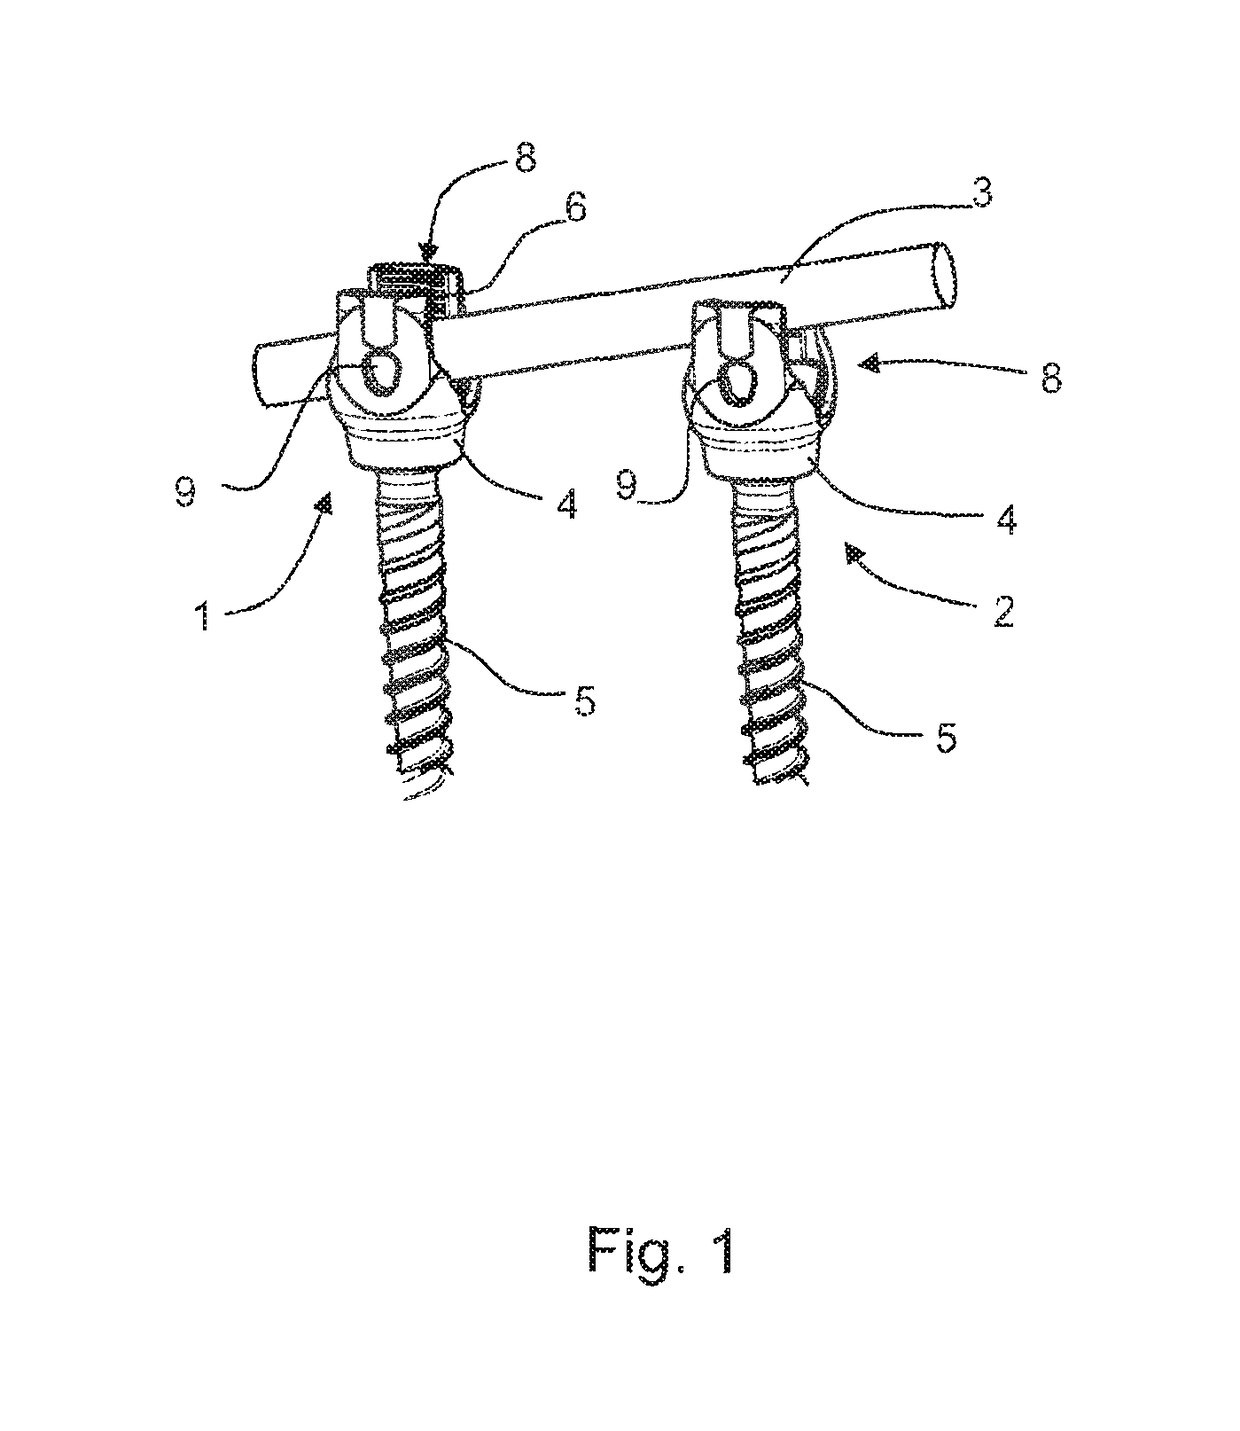 Surgical instrument for manipulating, positioning and fixing a surgical rod in relation to an implant